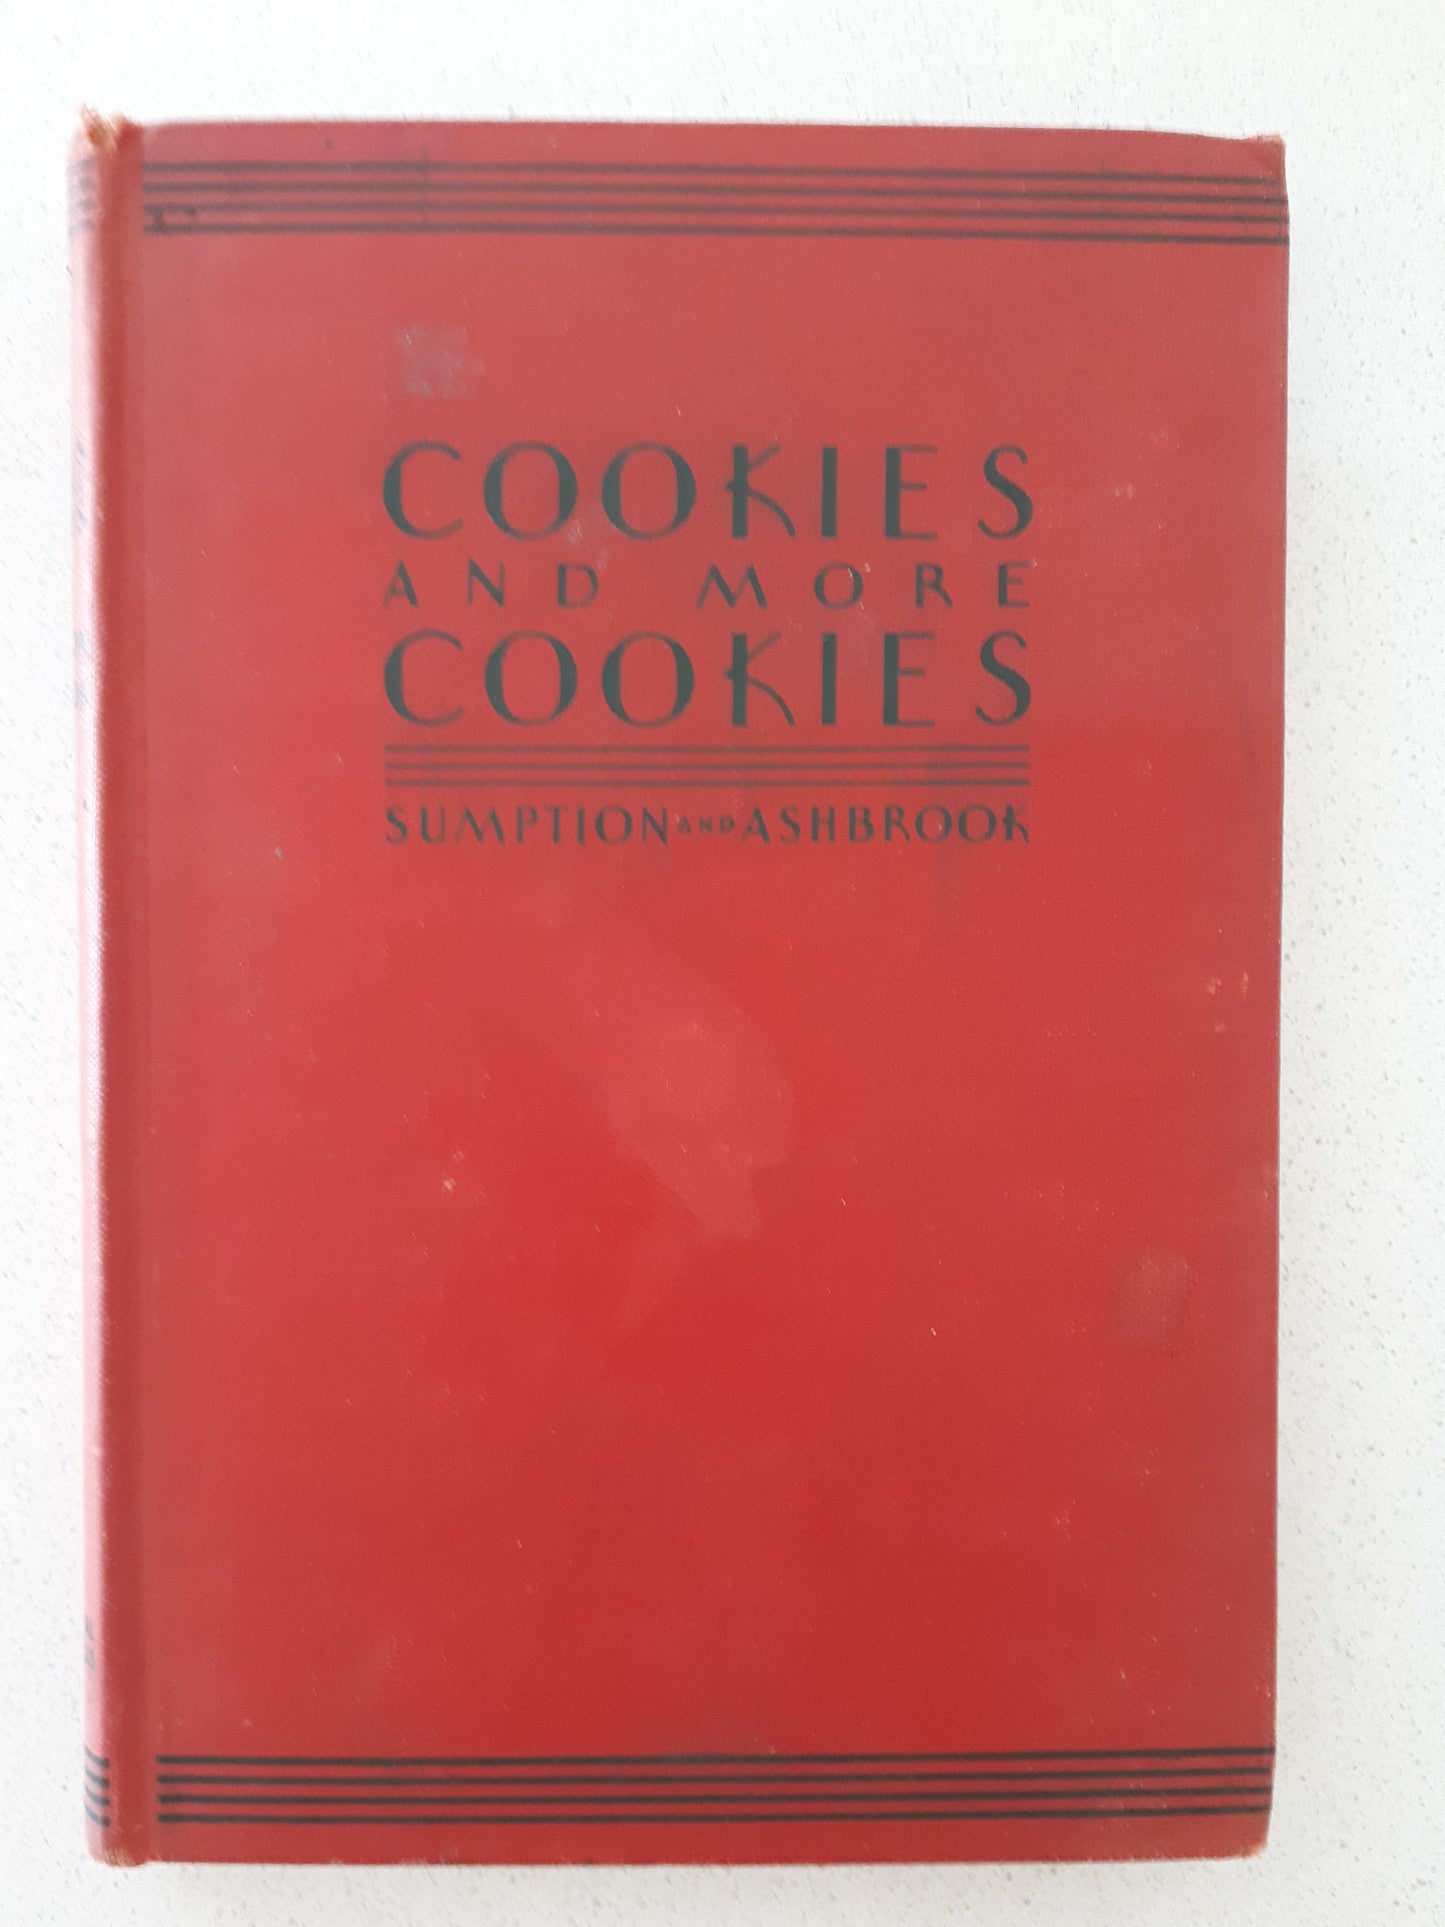 Cookies and More Cookies by Lois Lintner Sumpton & Marguerite Lintner Ashbrook